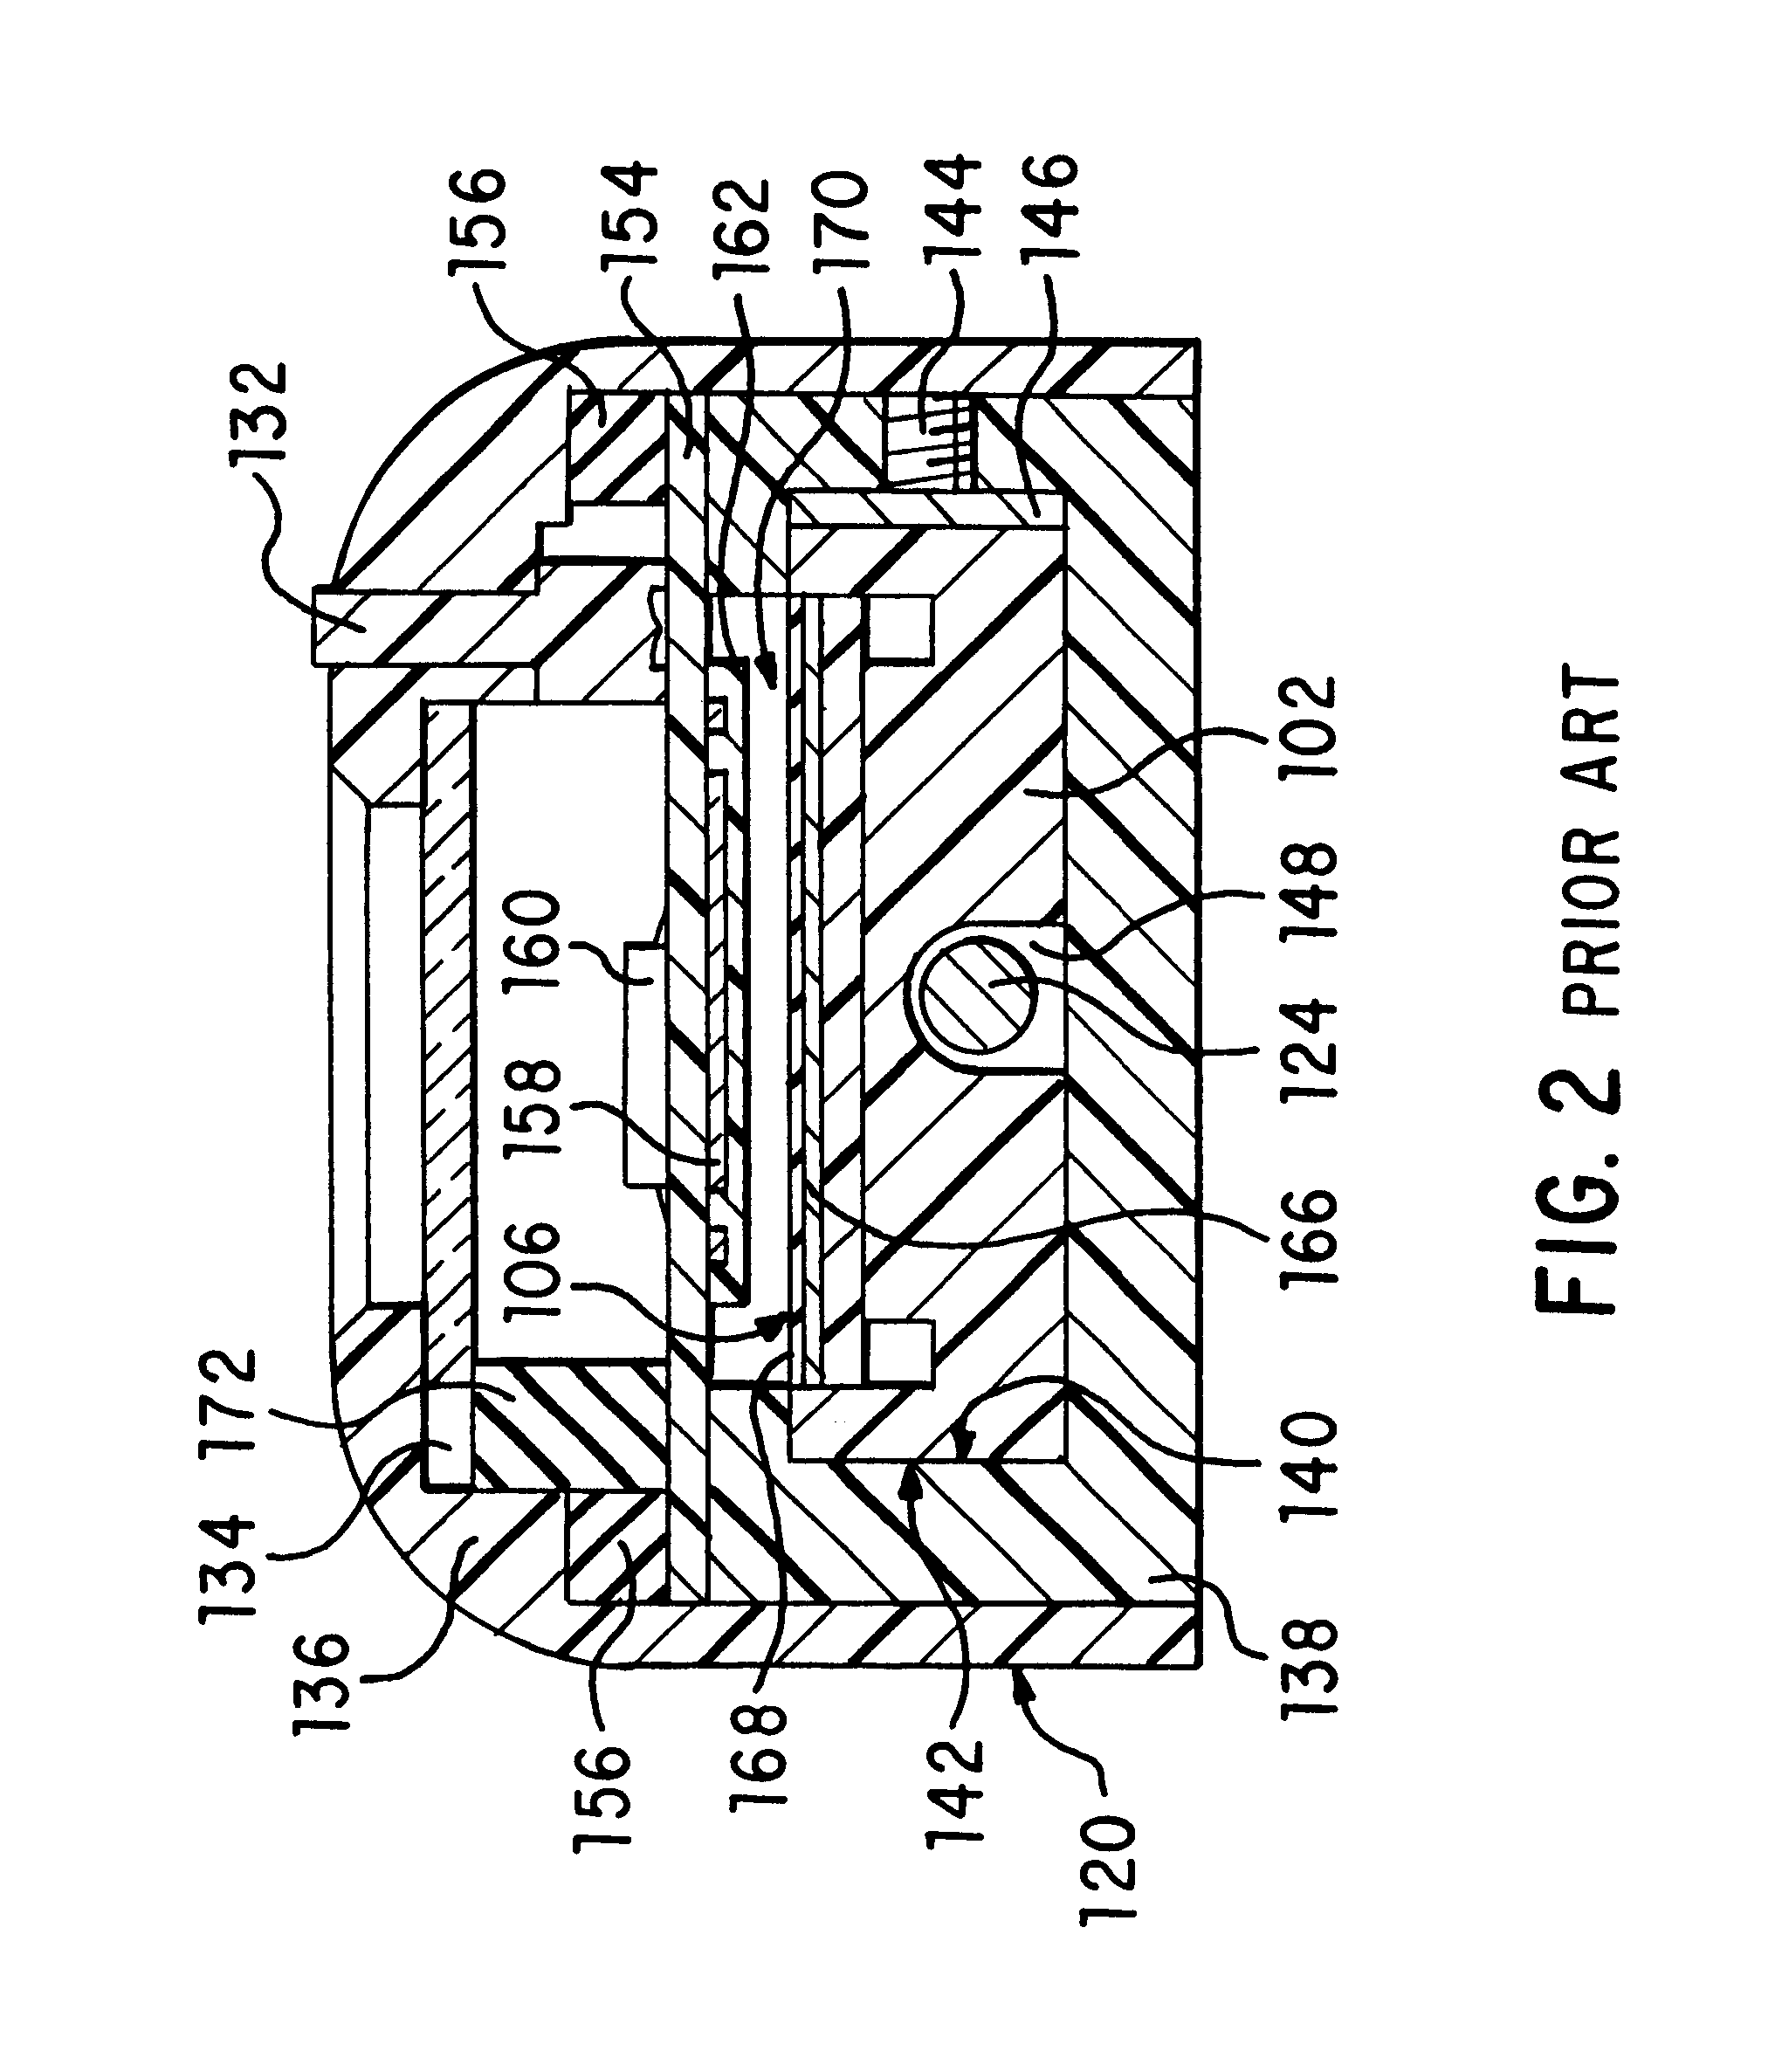 Electronic caliper using a reduced offset induced current position transducer